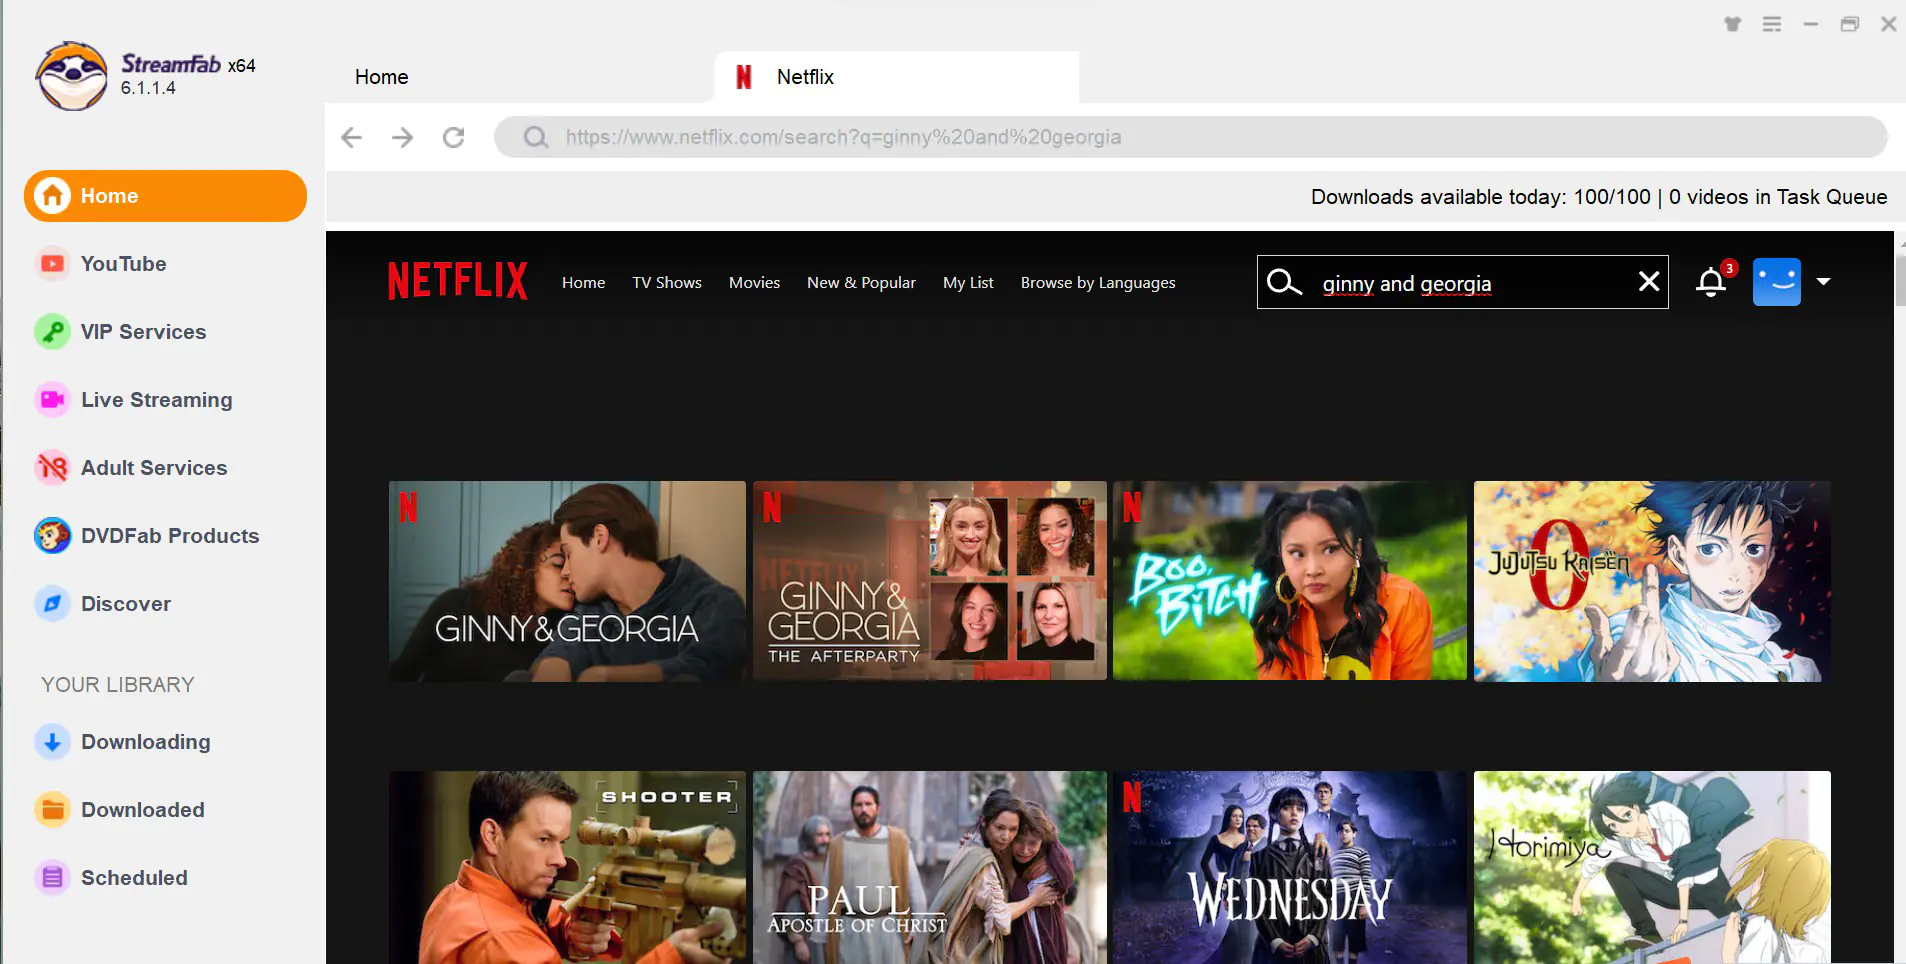 Find the Netflix movie or TV show by search